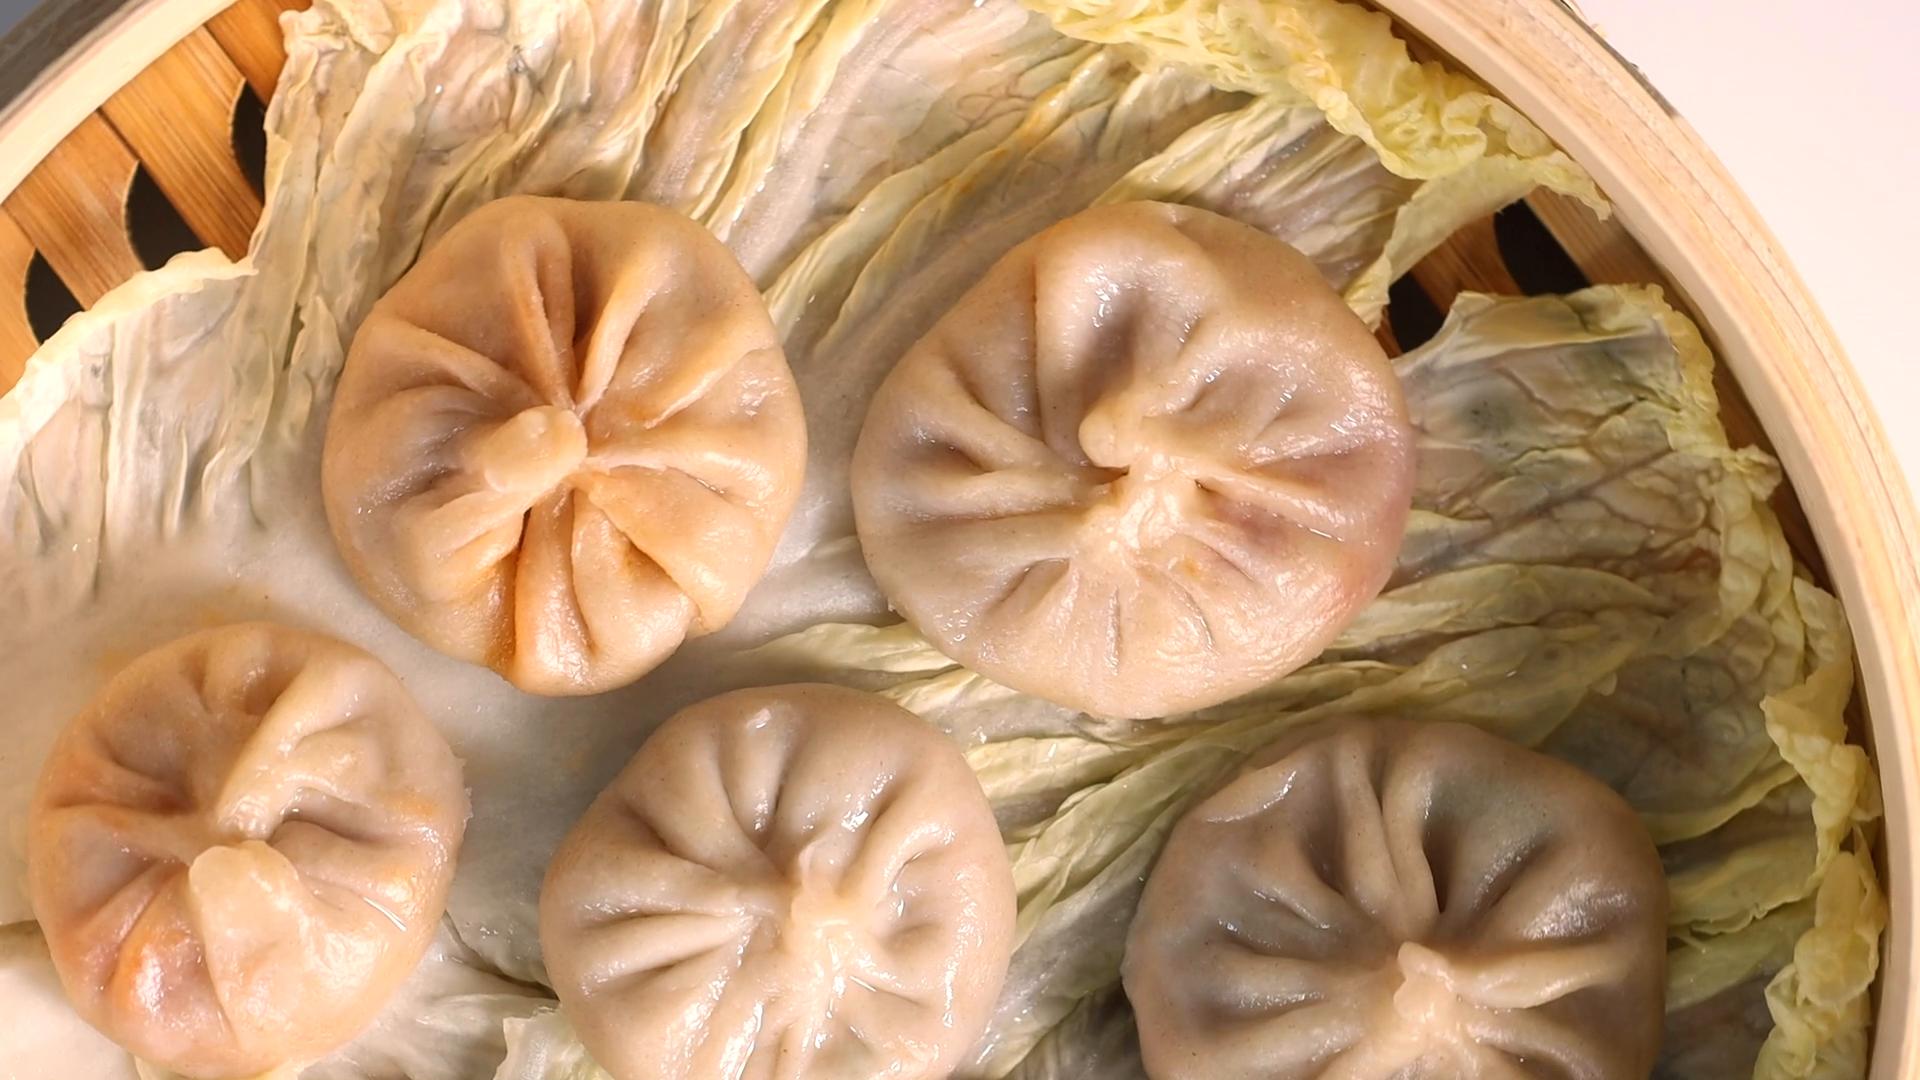 2-Day Crab And Pork Soup Dumplings Recipe by Tasty